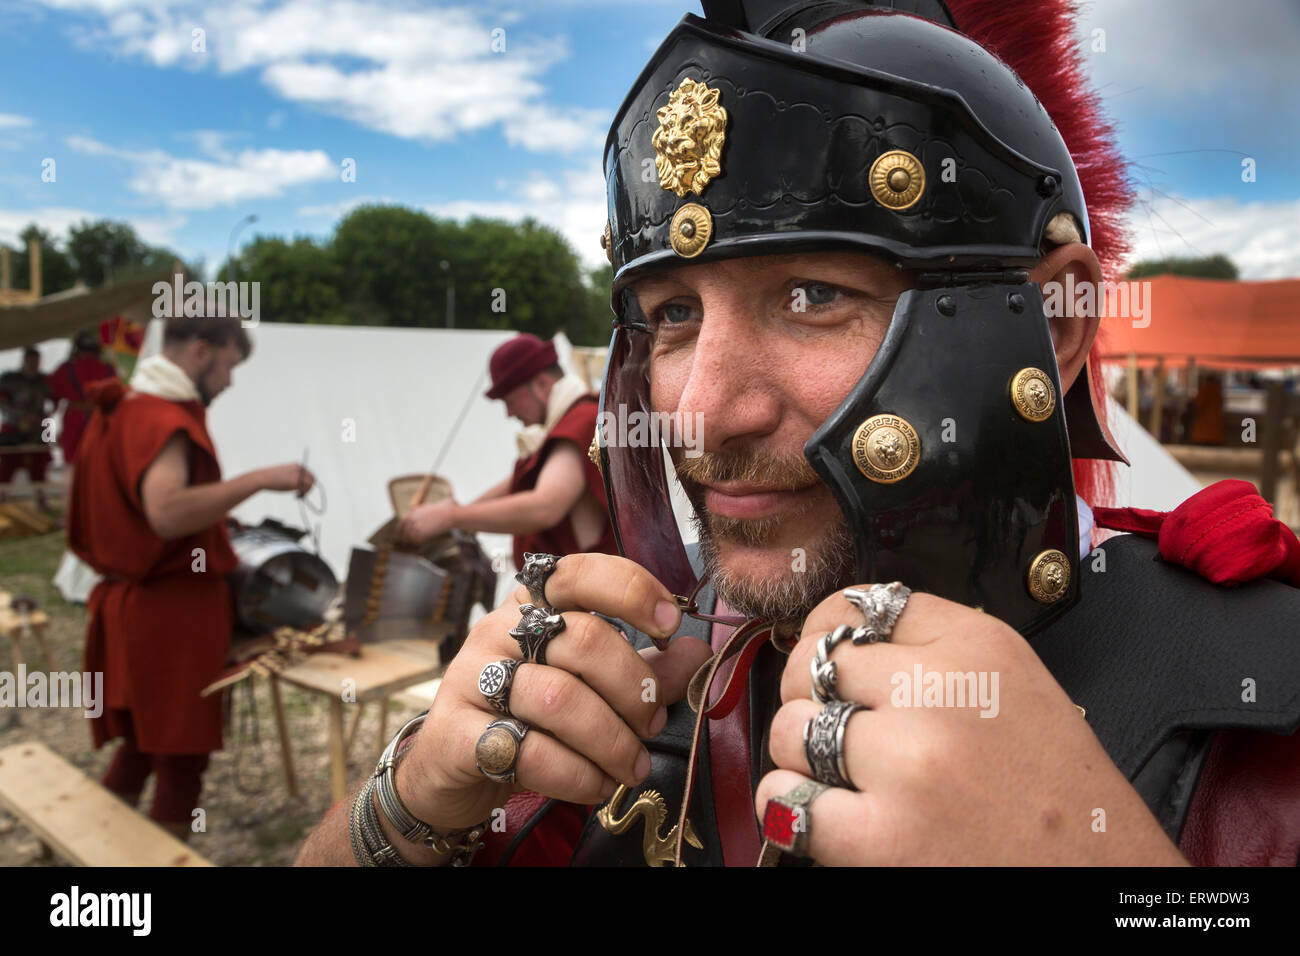 Moscow, Russia. 5th June, 2015. Participants of The 5th Times and Epochs festival - Ancient Rome at the Kolomenskoye Park in Moscow, Russia Stock Photo